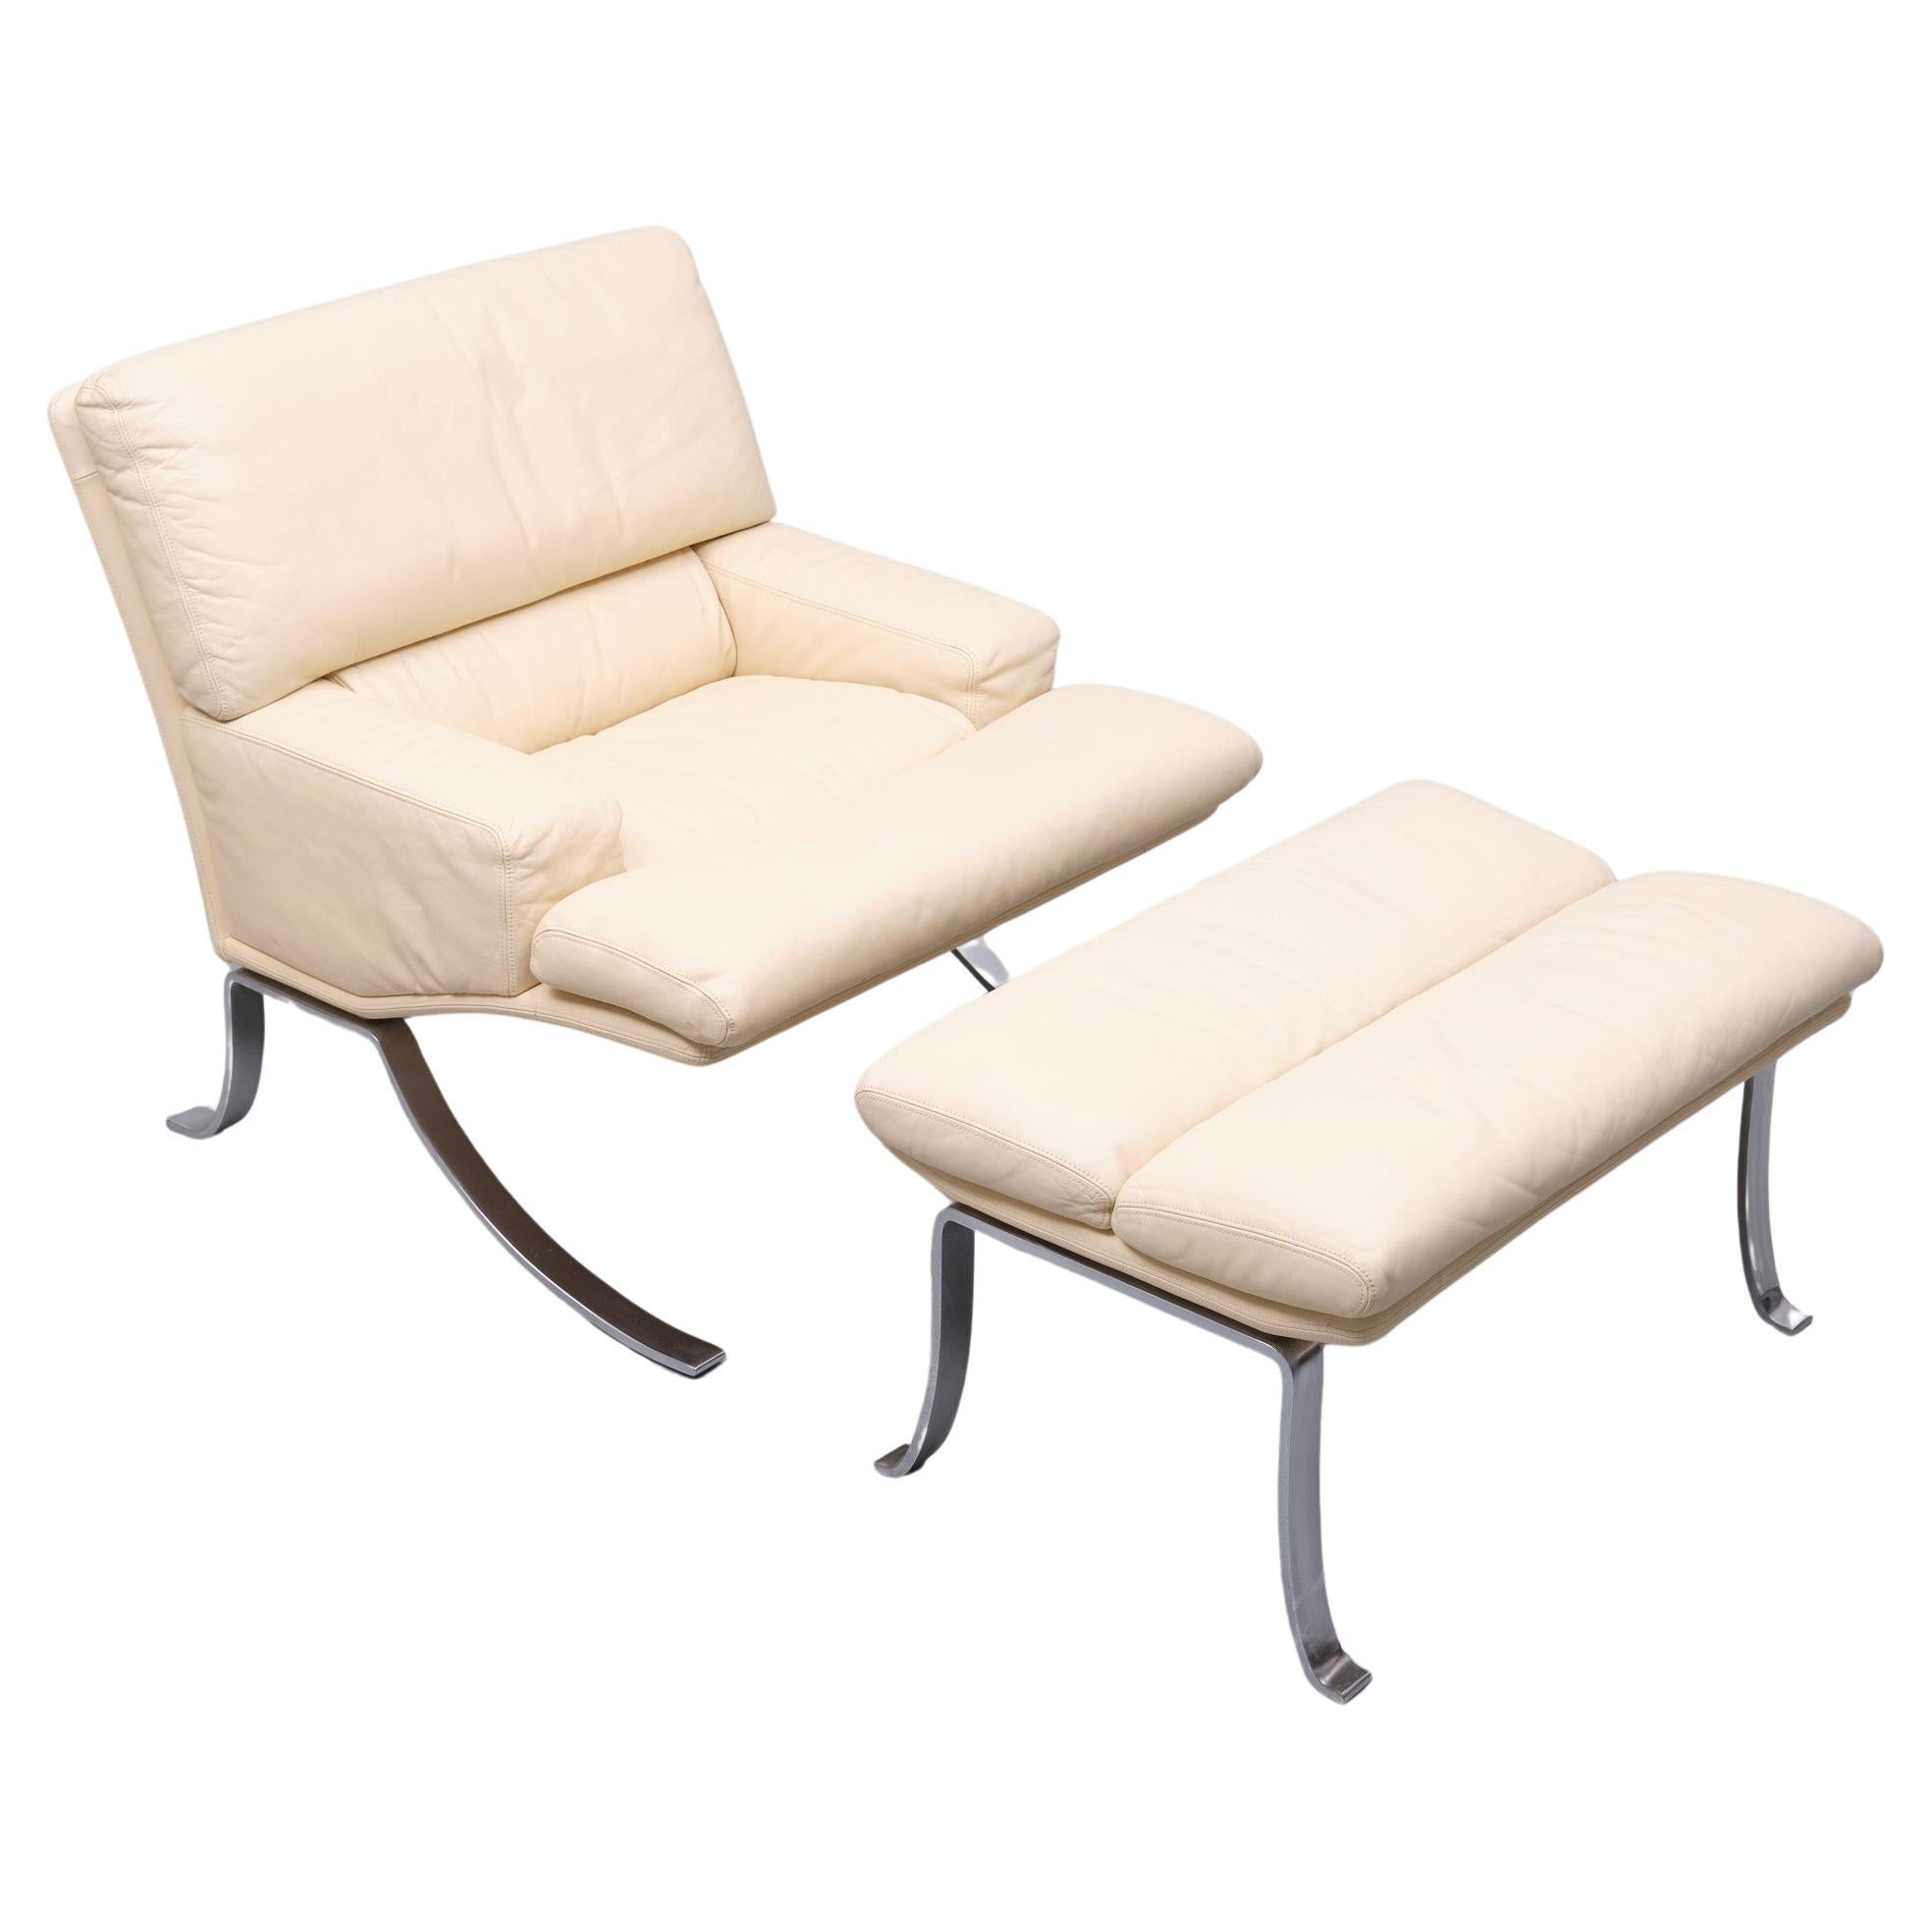 Belgian SUPERB Durlet lounge chairs and Ottoman  1970s Belgium  For Sale